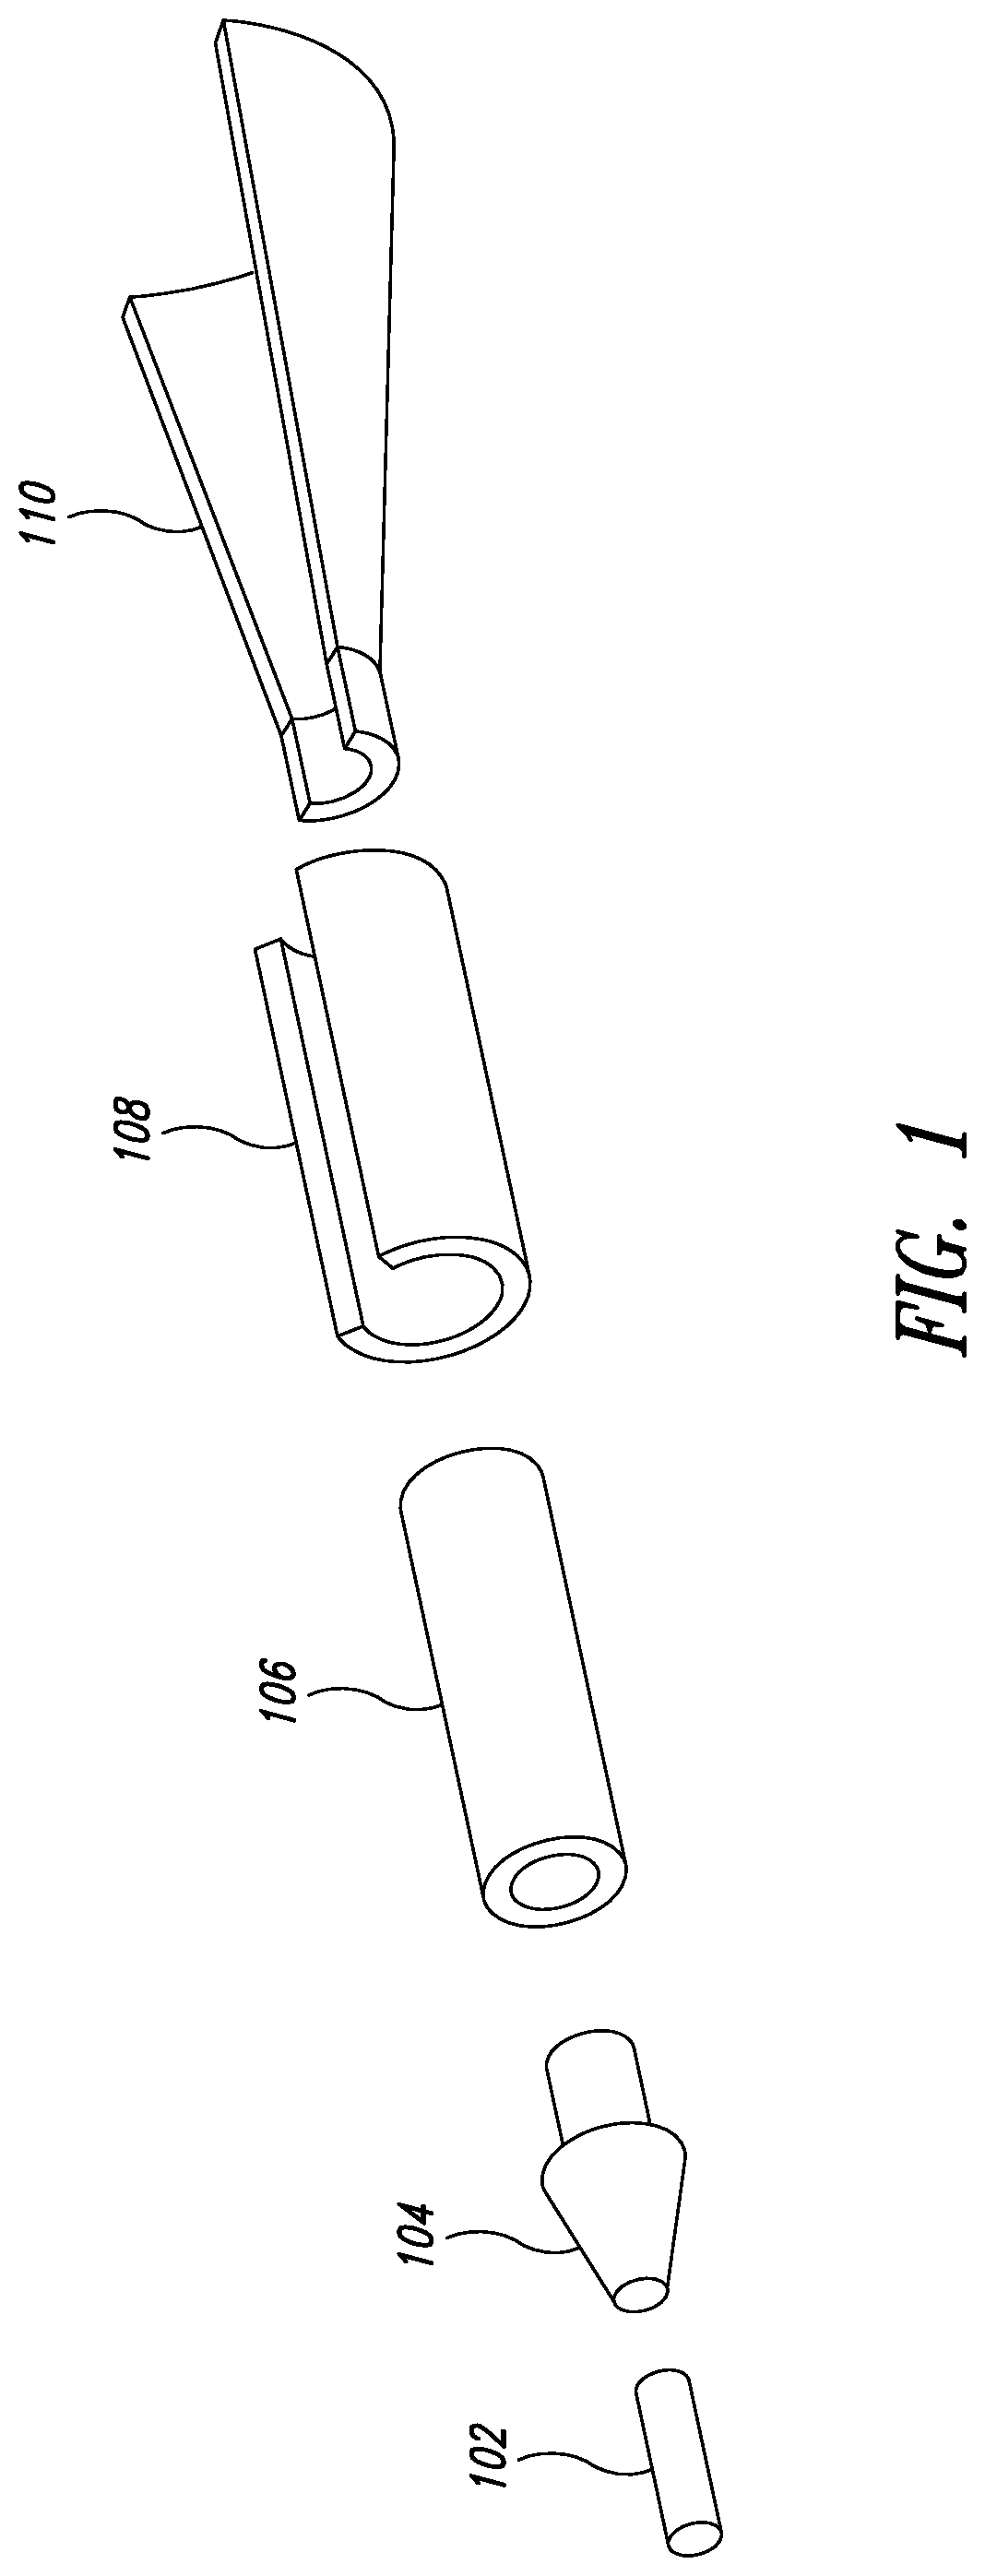 System and method of supplementing human hair volume